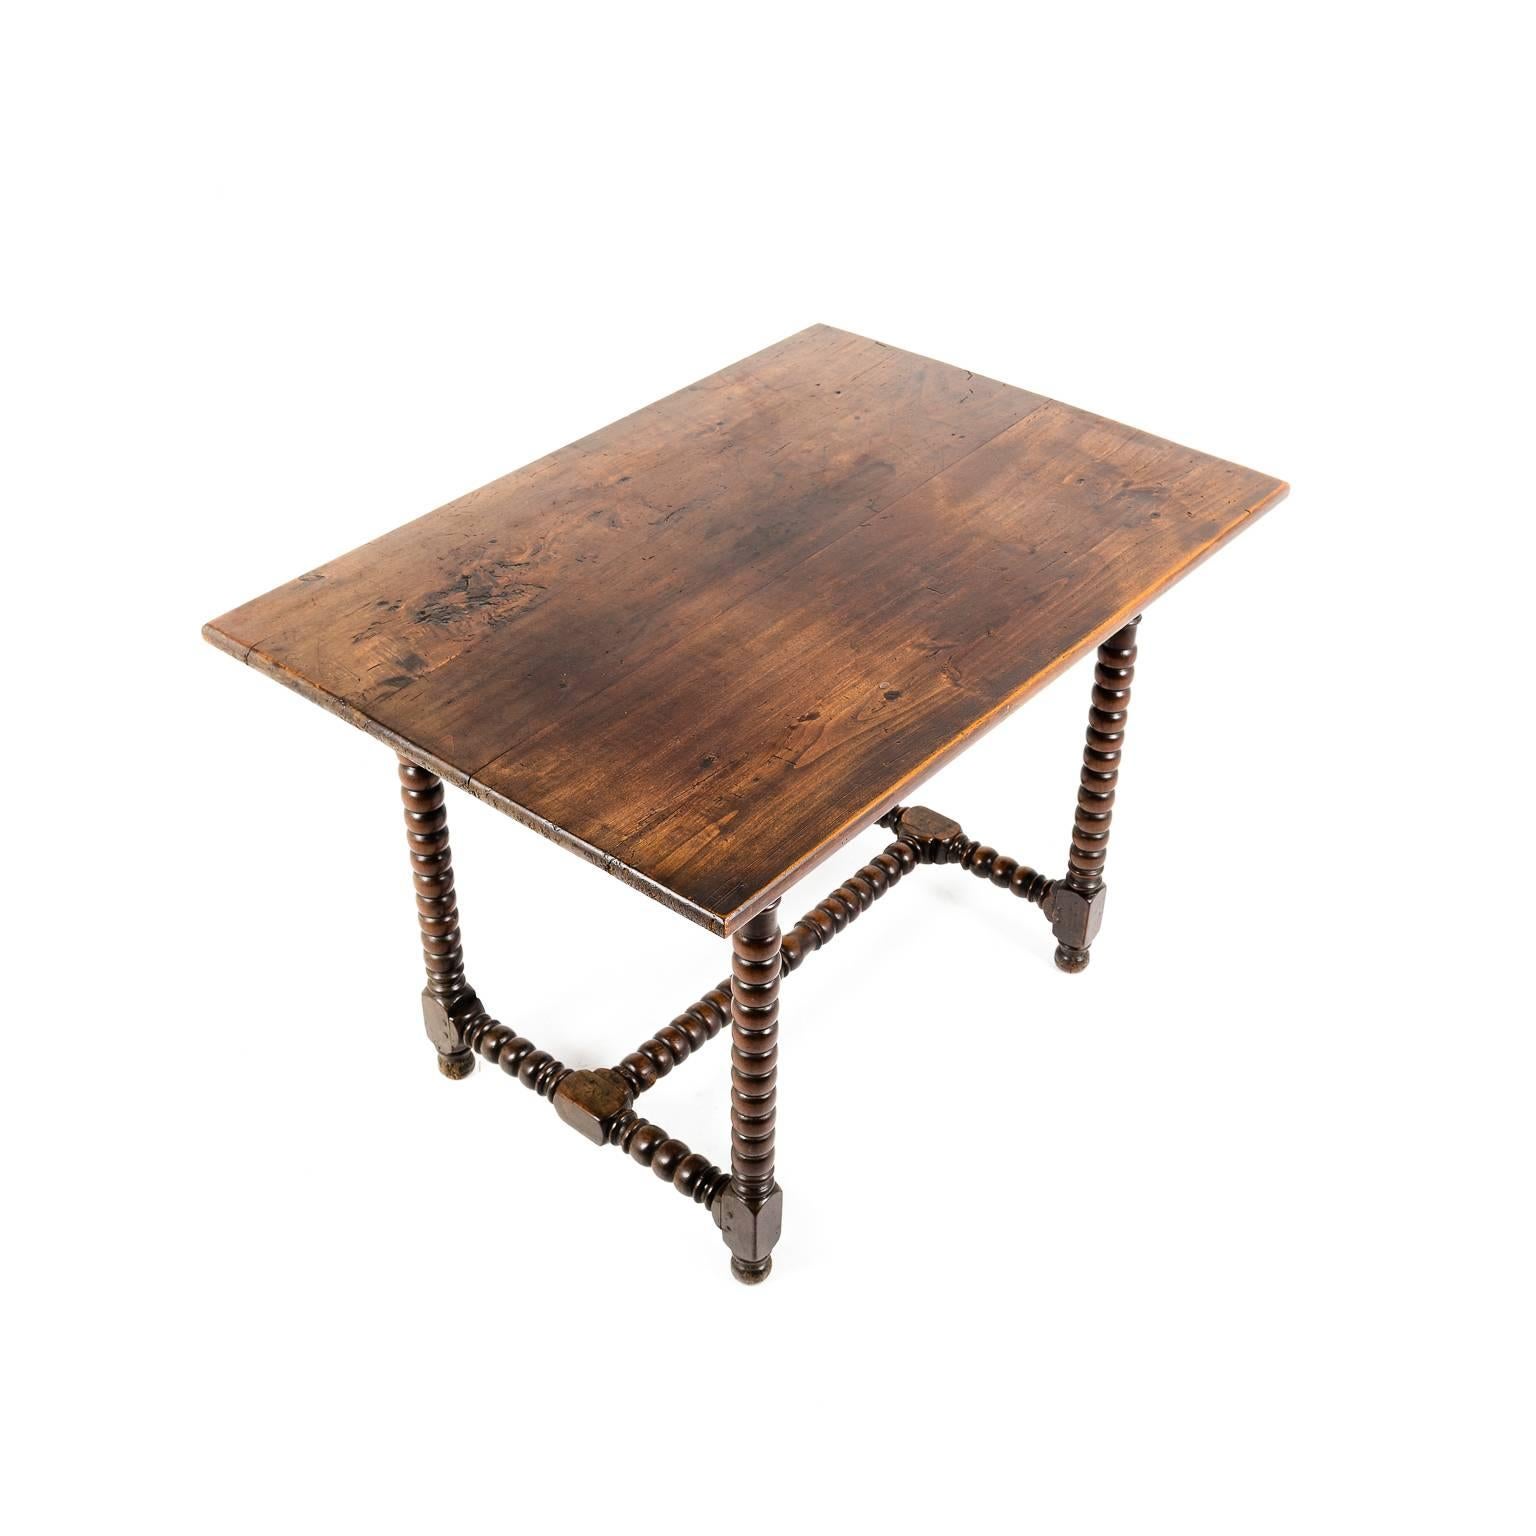 Antique small country French table with bobbin turned legs, circa 1830. A lovely patina on this unique piece, with a size that makes it suitable for a number of different sites throughout the home.



